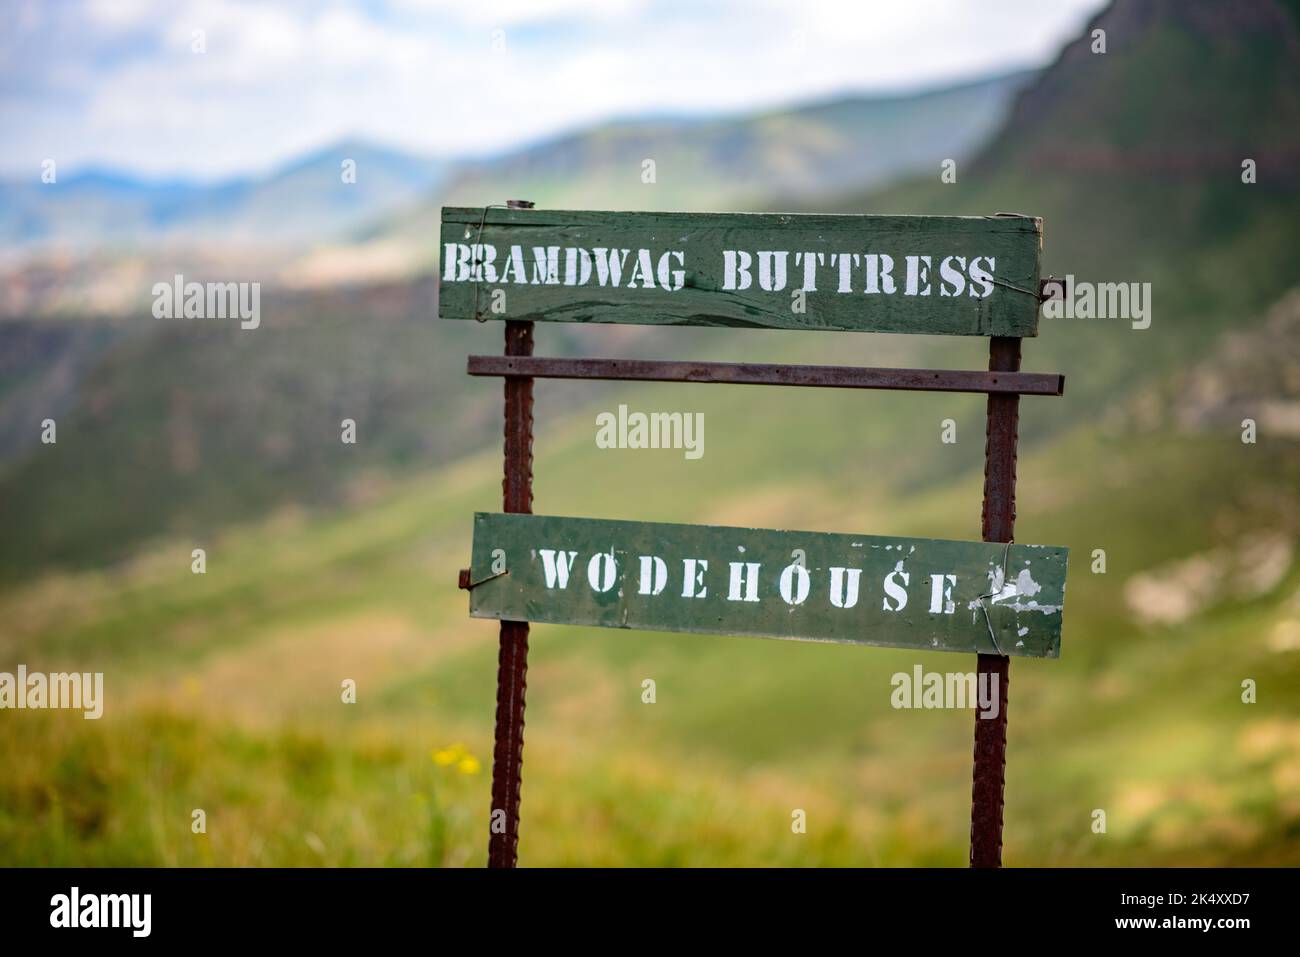 A sign post on the Brandwag Buttress trail in the Golden Gate Highlands National Park, South Africa Stock Photo